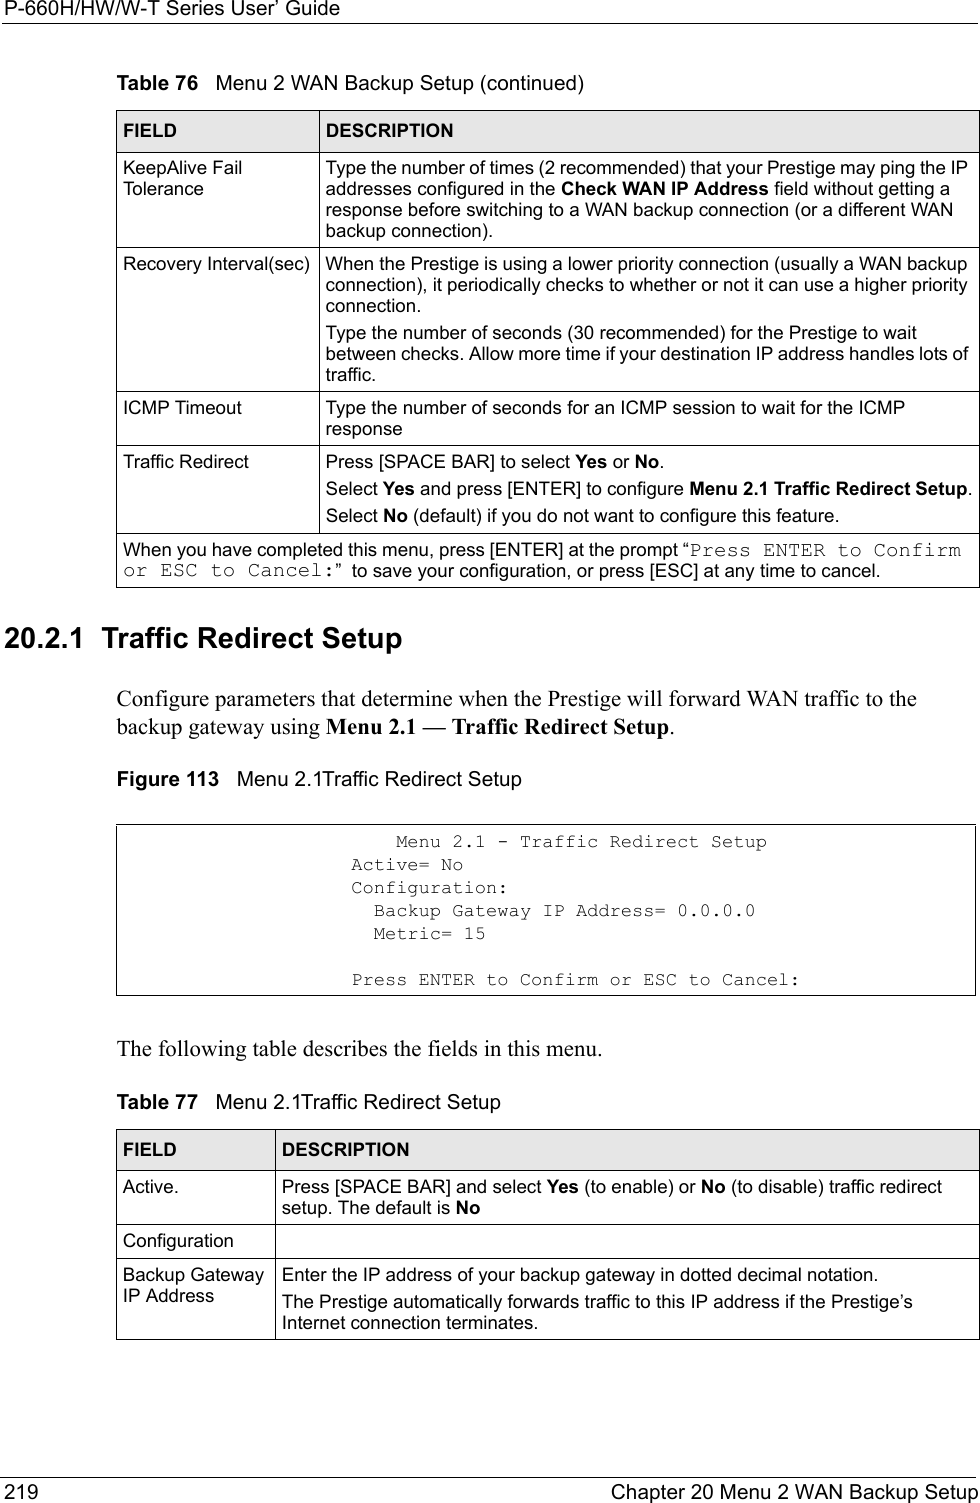 P-660H/HW/W-T Series User’ Guide219 Chapter 20 Menu 2 WAN Backup Setup20.2.1  Traffic Redirect SetupConfigure parameters that determine when the Prestige will forward WAN traffic to the backup gateway using Menu 2.1 — Traffic Redirect Setup. Figure 113   Menu 2.1Traffic Redirect SetupThe following table describes the fields in this menu.KeepAlive Fail ToleranceType the number of times (2 recommended) that your Prestige may ping the IP addresses configured in the Check WAN IP Address field without getting a response before switching to a WAN backup connection (or a different WAN backup connection).Recovery Interval(sec) When the Prestige is using a lower priority connection (usually a WAN backup connection), it periodically checks to whether or not it can use a higher priority connection.Type the number of seconds (30 recommended) for the Prestige to wait between checks. Allow more time if your destination IP address handles lots of traffic.ICMP Timeout Type the number of seconds for an ICMP session to wait for the ICMP responseTraffic Redirect Press [SPACE BAR] to select Yes or No. Select Yes and press [ENTER] to configure Menu 2.1 Traffic Redirect Setup.Select No (default) if you do not want to configure this feature. When you have completed this menu, press [ENTER] at the prompt “Press ENTER to Confirm or ESC to Cancel:”  to save your configuration, or press [ESC] at any time to cancel.Table 76   Menu 2 WAN Backup Setup (continued)FIELD DESCRIPTION           Menu 2.1 - Traffic Redirect Setup       Active= No       Configuration:         Backup Gateway IP Address= 0.0.0.0         Metric= 15       Press ENTER to Confirm or ESC to Cancel:Table 77   Menu 2.1Traffic Redirect SetupFIELD DESCRIPTIONActive. Press [SPACE BAR] and select Yes (to enable) or No (to disable) traffic redirect setup. The default is NoConfigurationBackup Gateway IP AddressEnter the IP address of your backup gateway in dotted decimal notation.The Prestige automatically forwards traffic to this IP address if the Prestige’s Internet connection terminates. 